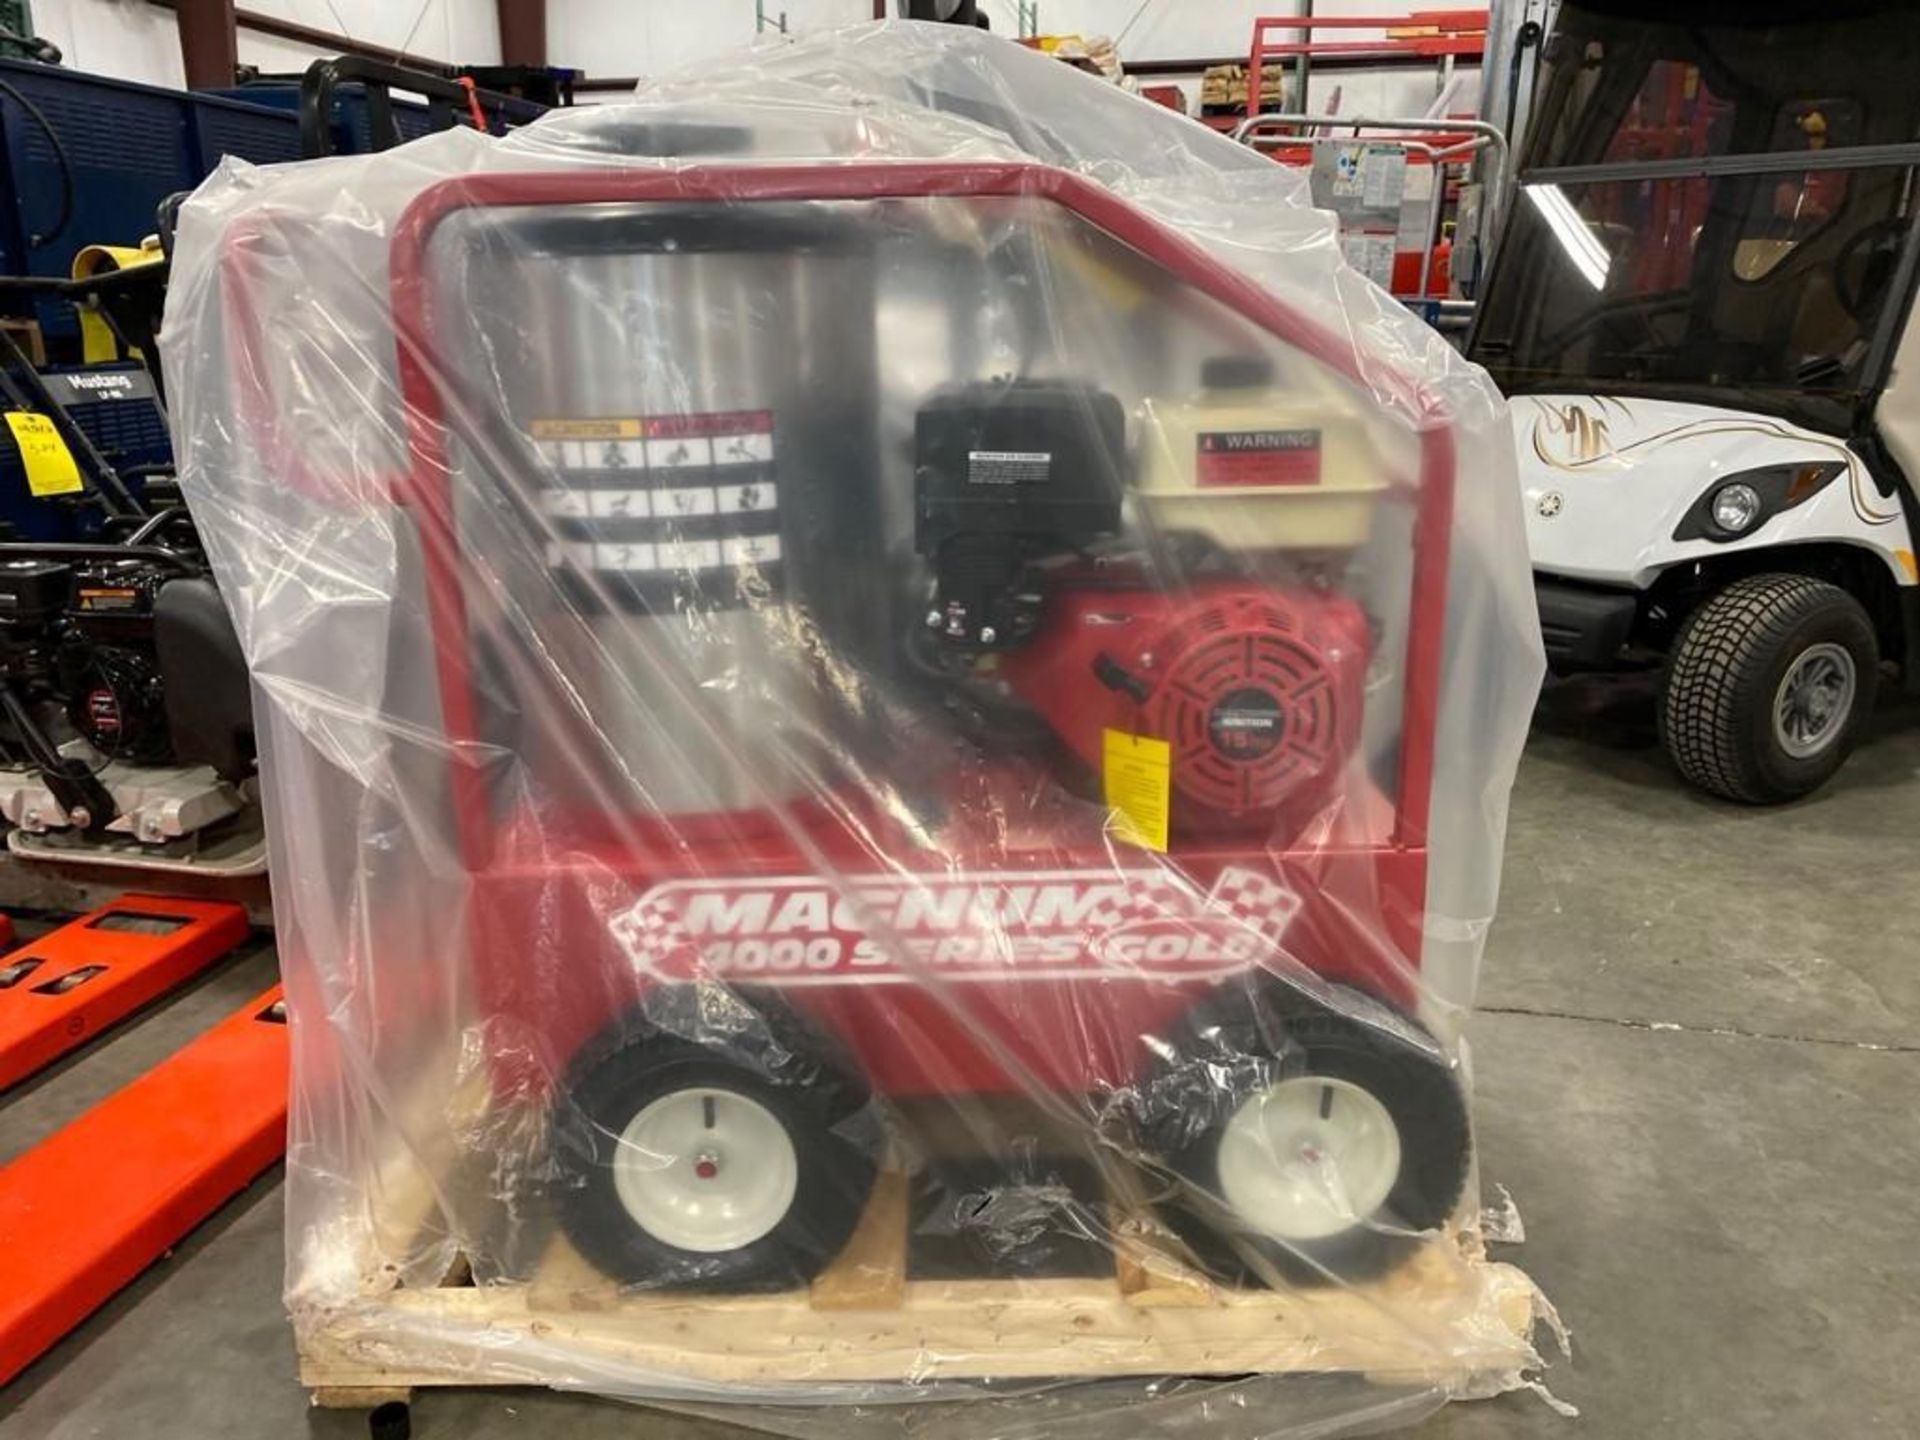 NEW/UNUSED 2020 MAGNUM 4000 HEATED PRESSURE WASHER, ELECTRIC START, WAND AND HOSE INCLUDED, RUNS AND